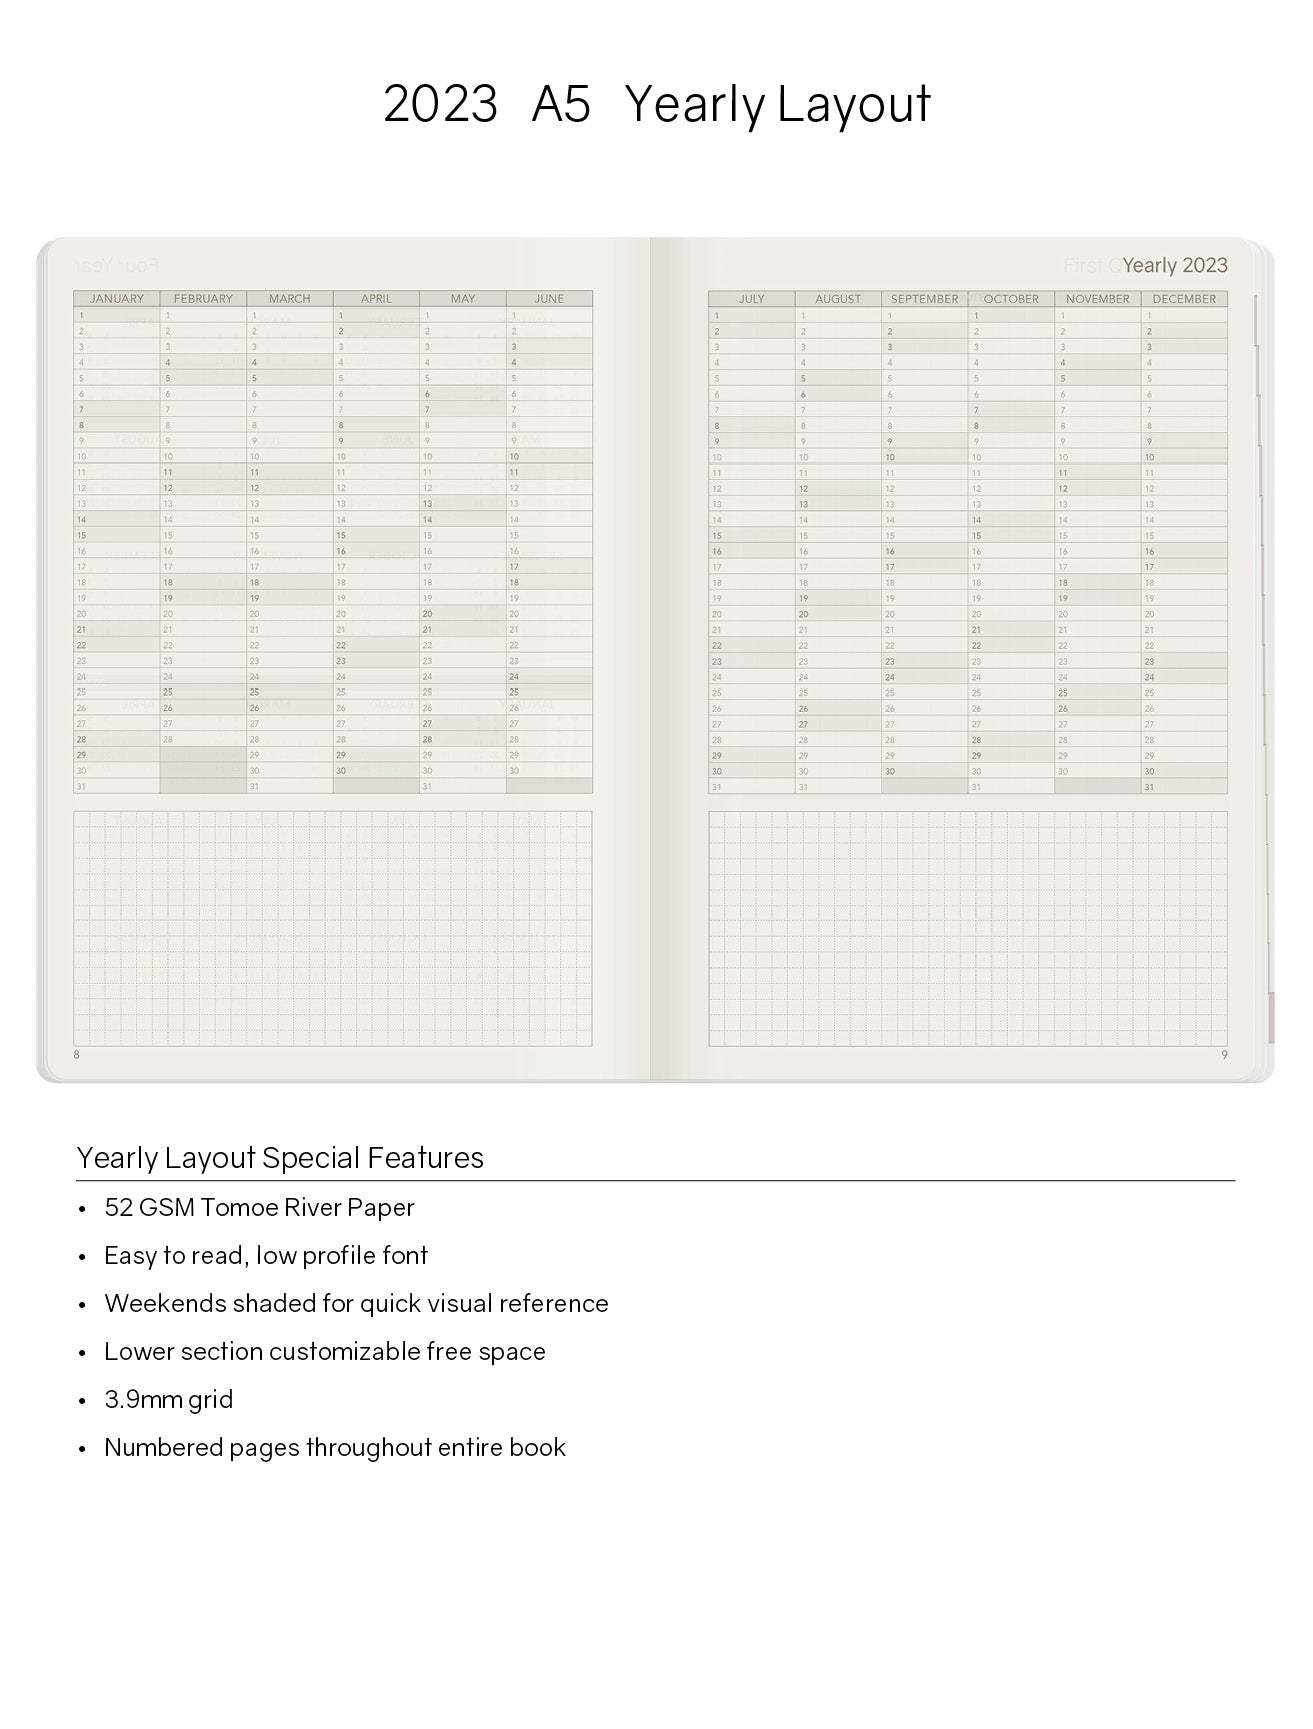 Printable 2024 and 2025 Annual Calendar, Refill to Print in French for  Planner A5 and A4 Format, Notes Page for Annual Overview 